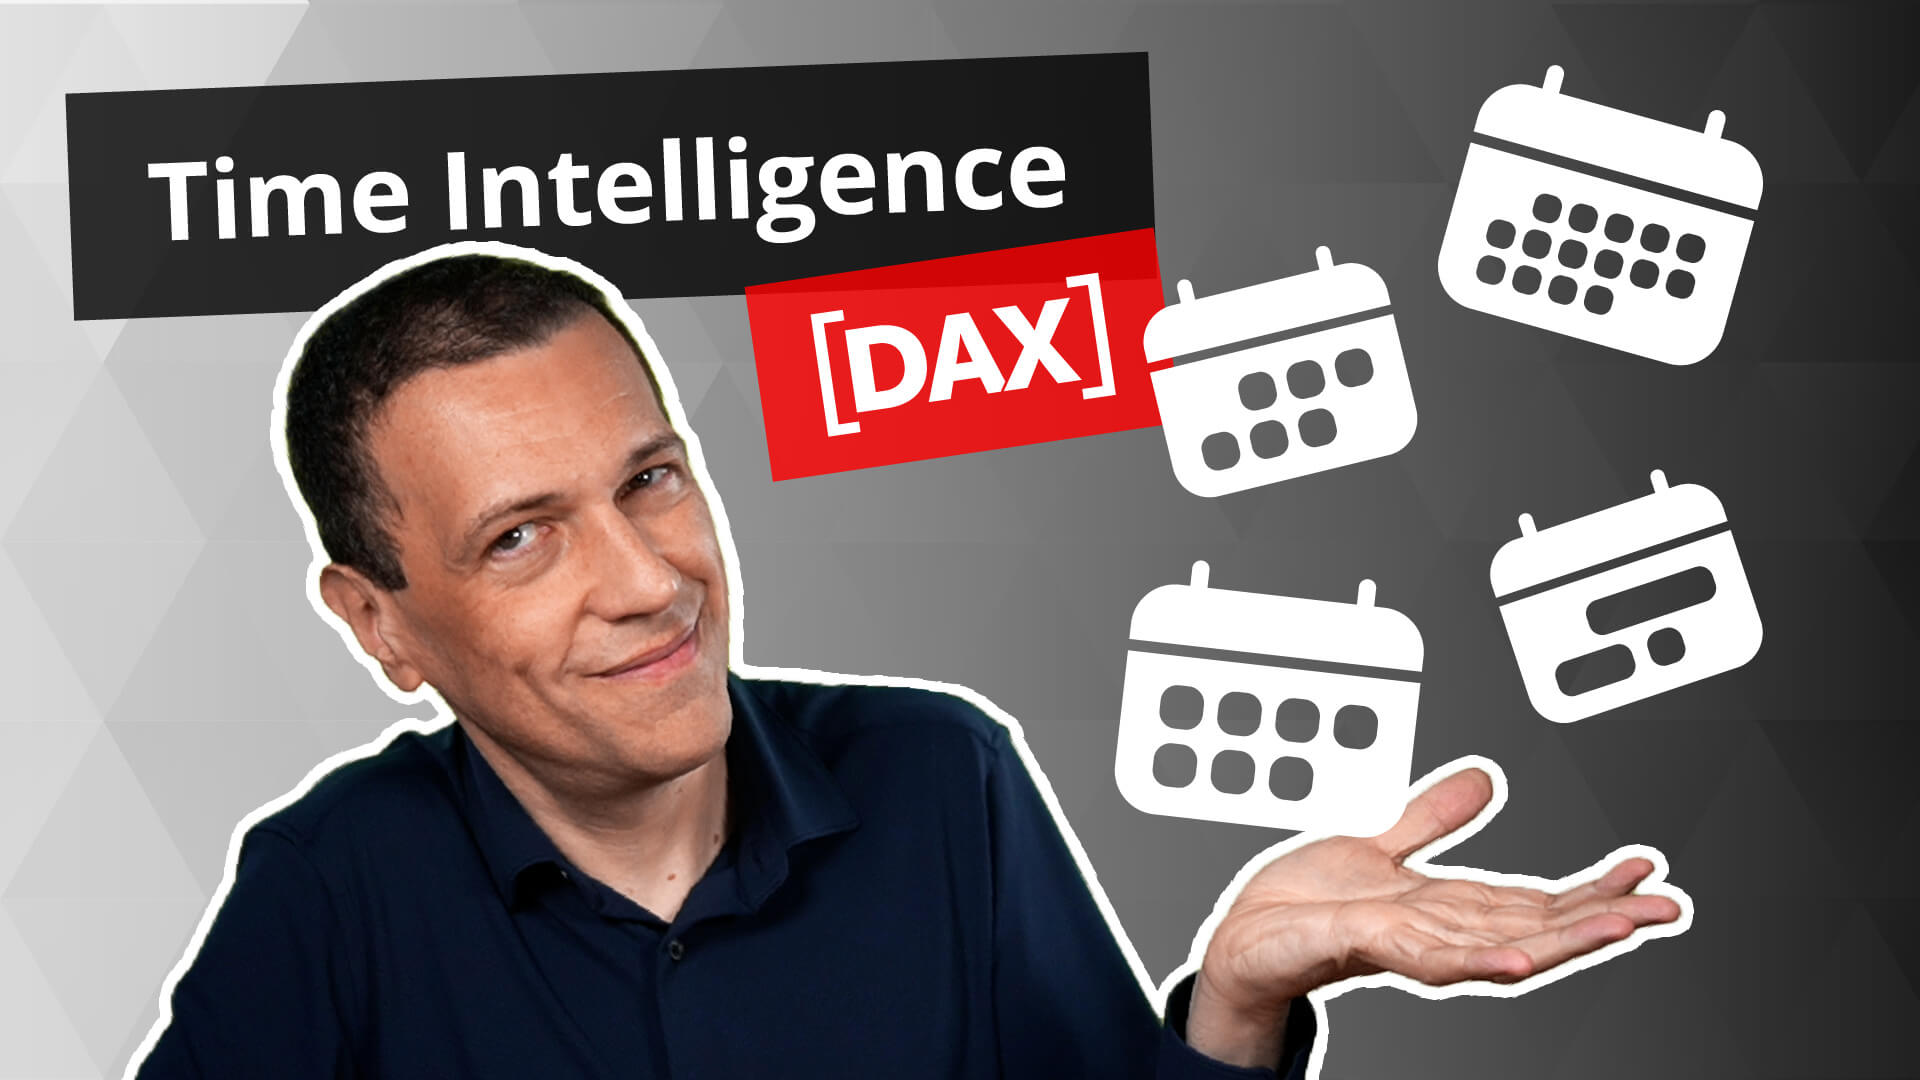 Understanding Time Intelligence with DAX